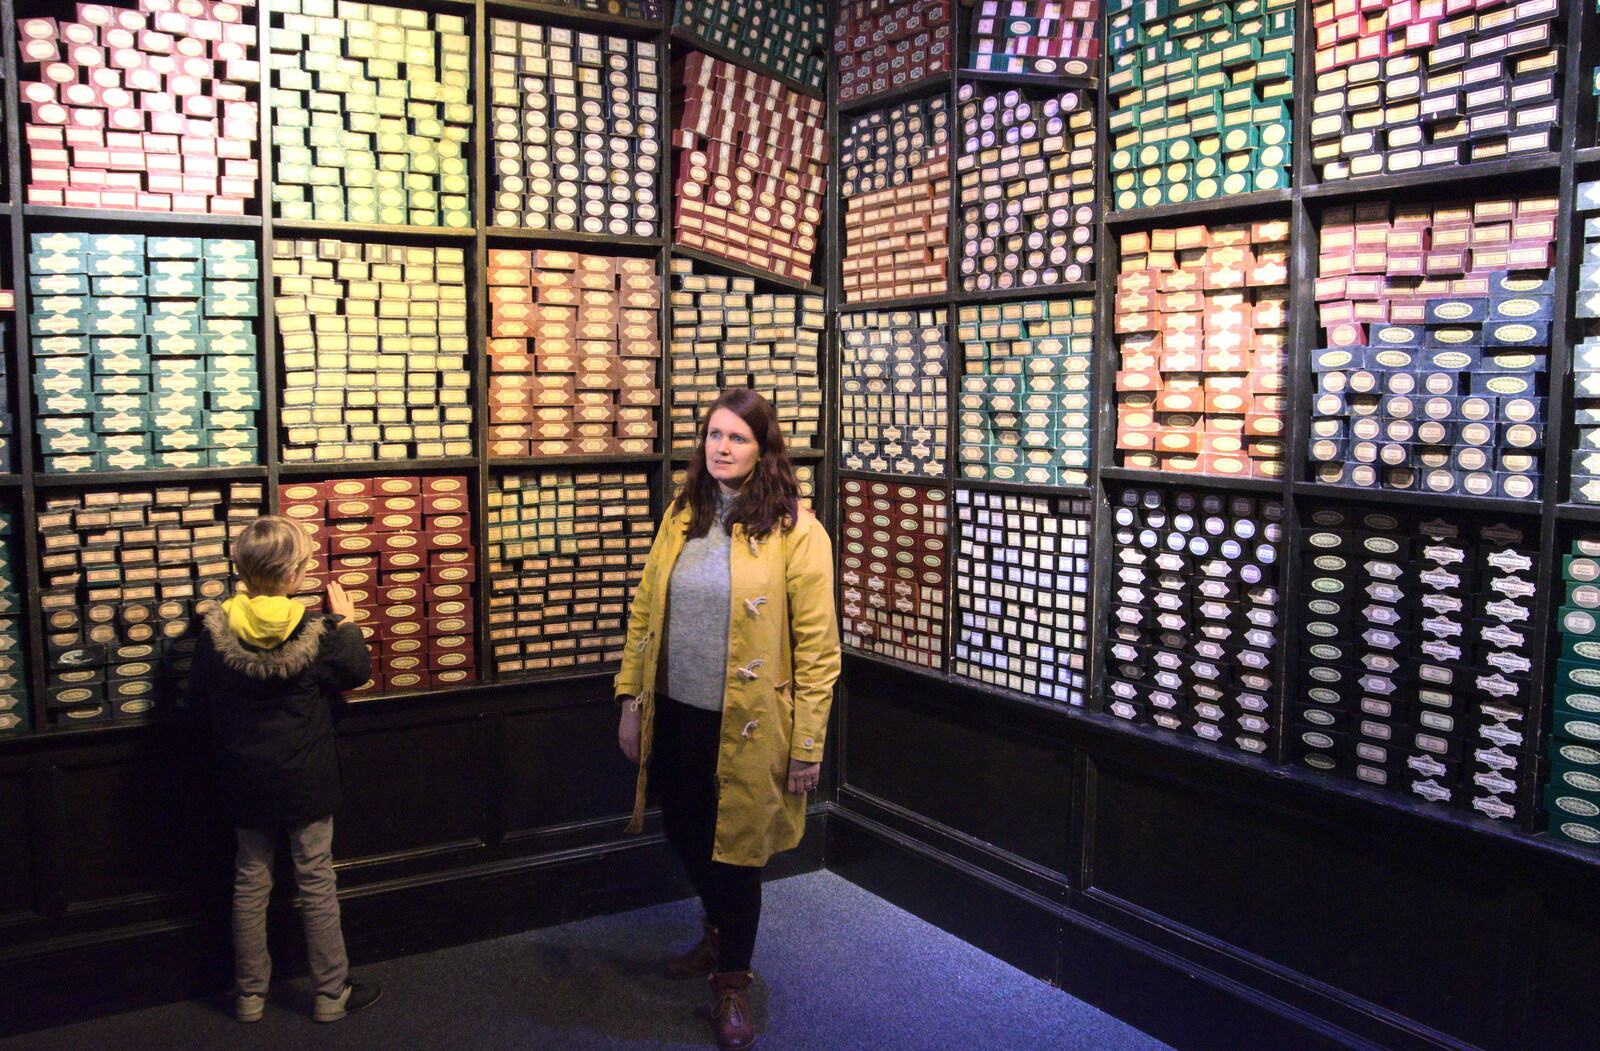 Millions of wands in boxes from A Trip to Harry Potter World, Leavesden, Hertfordshire - 16th February 2020